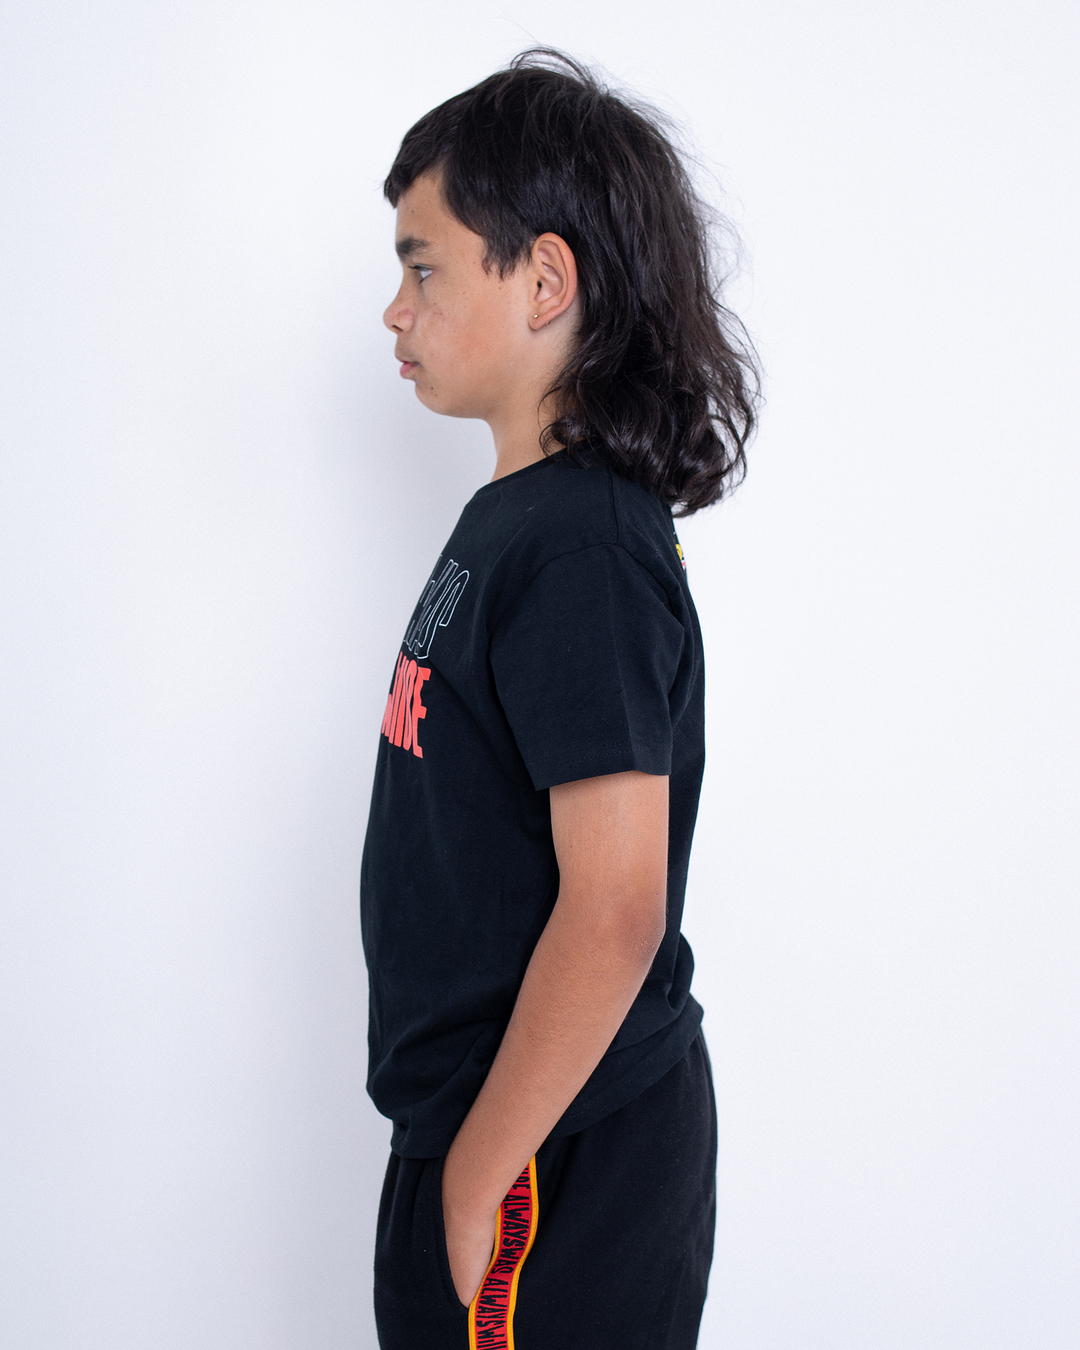 Clothing The Gaps. Black kids short sleeve T-shirt with Black, yellow and red 'always was always will be' text screen printed in centre.